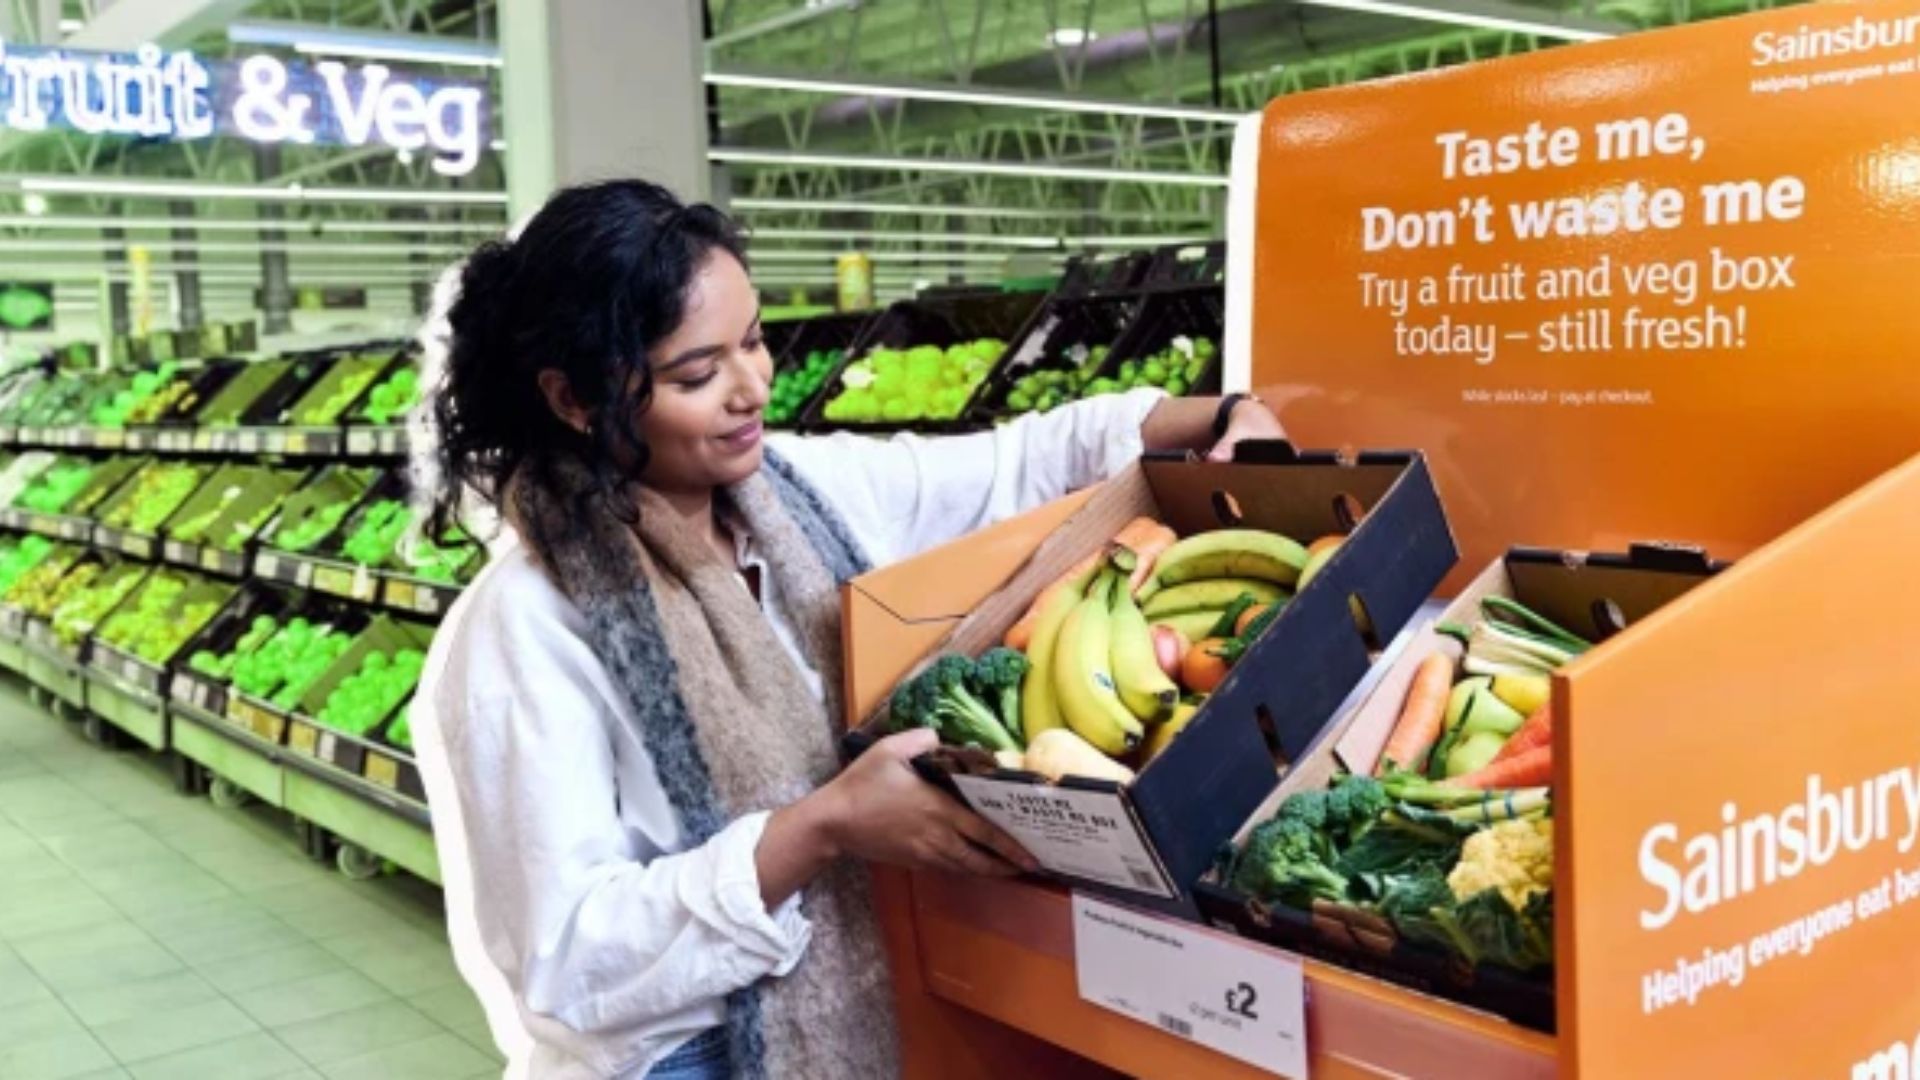 Sainsbury s carries out £2 products of soil boxes to assist with food waste